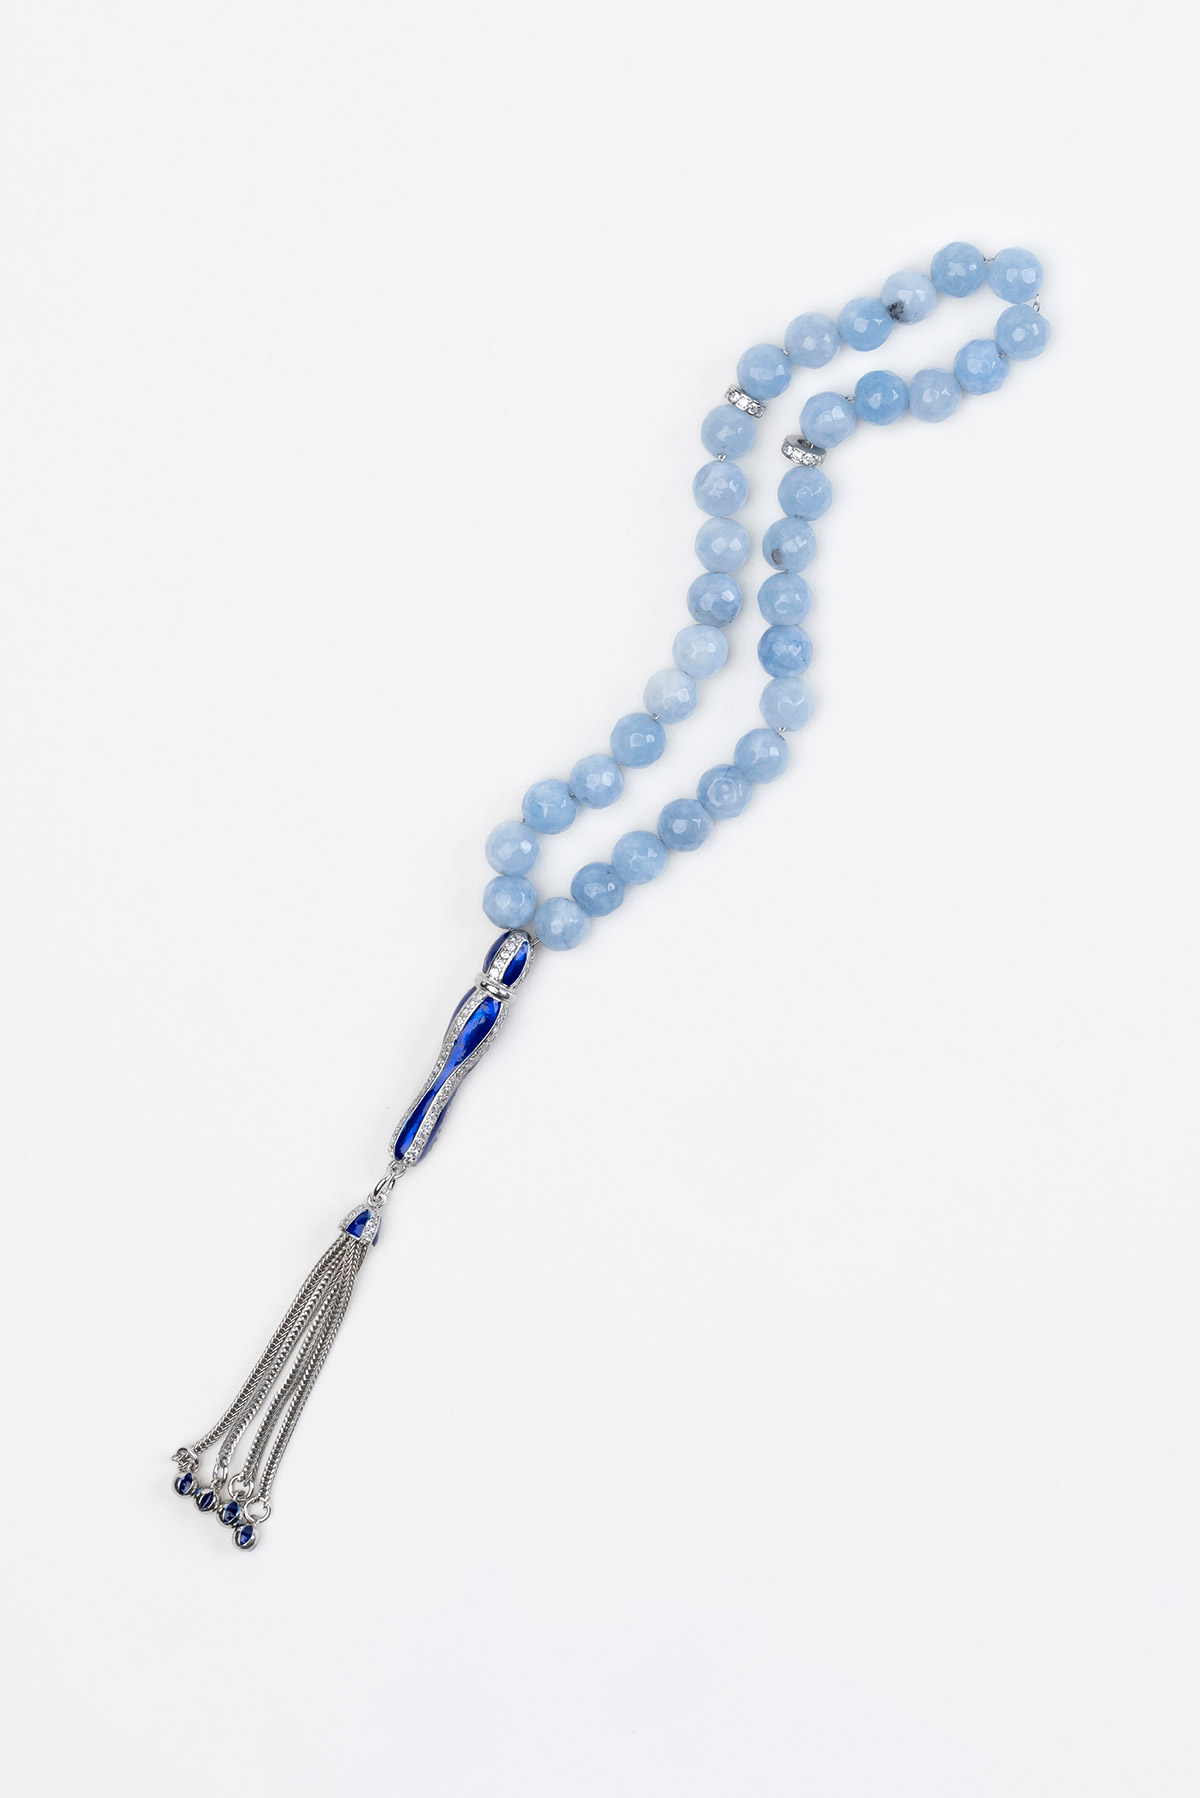  Natural Aquamarine Stone Worry Beads 925 Sterling Silver 